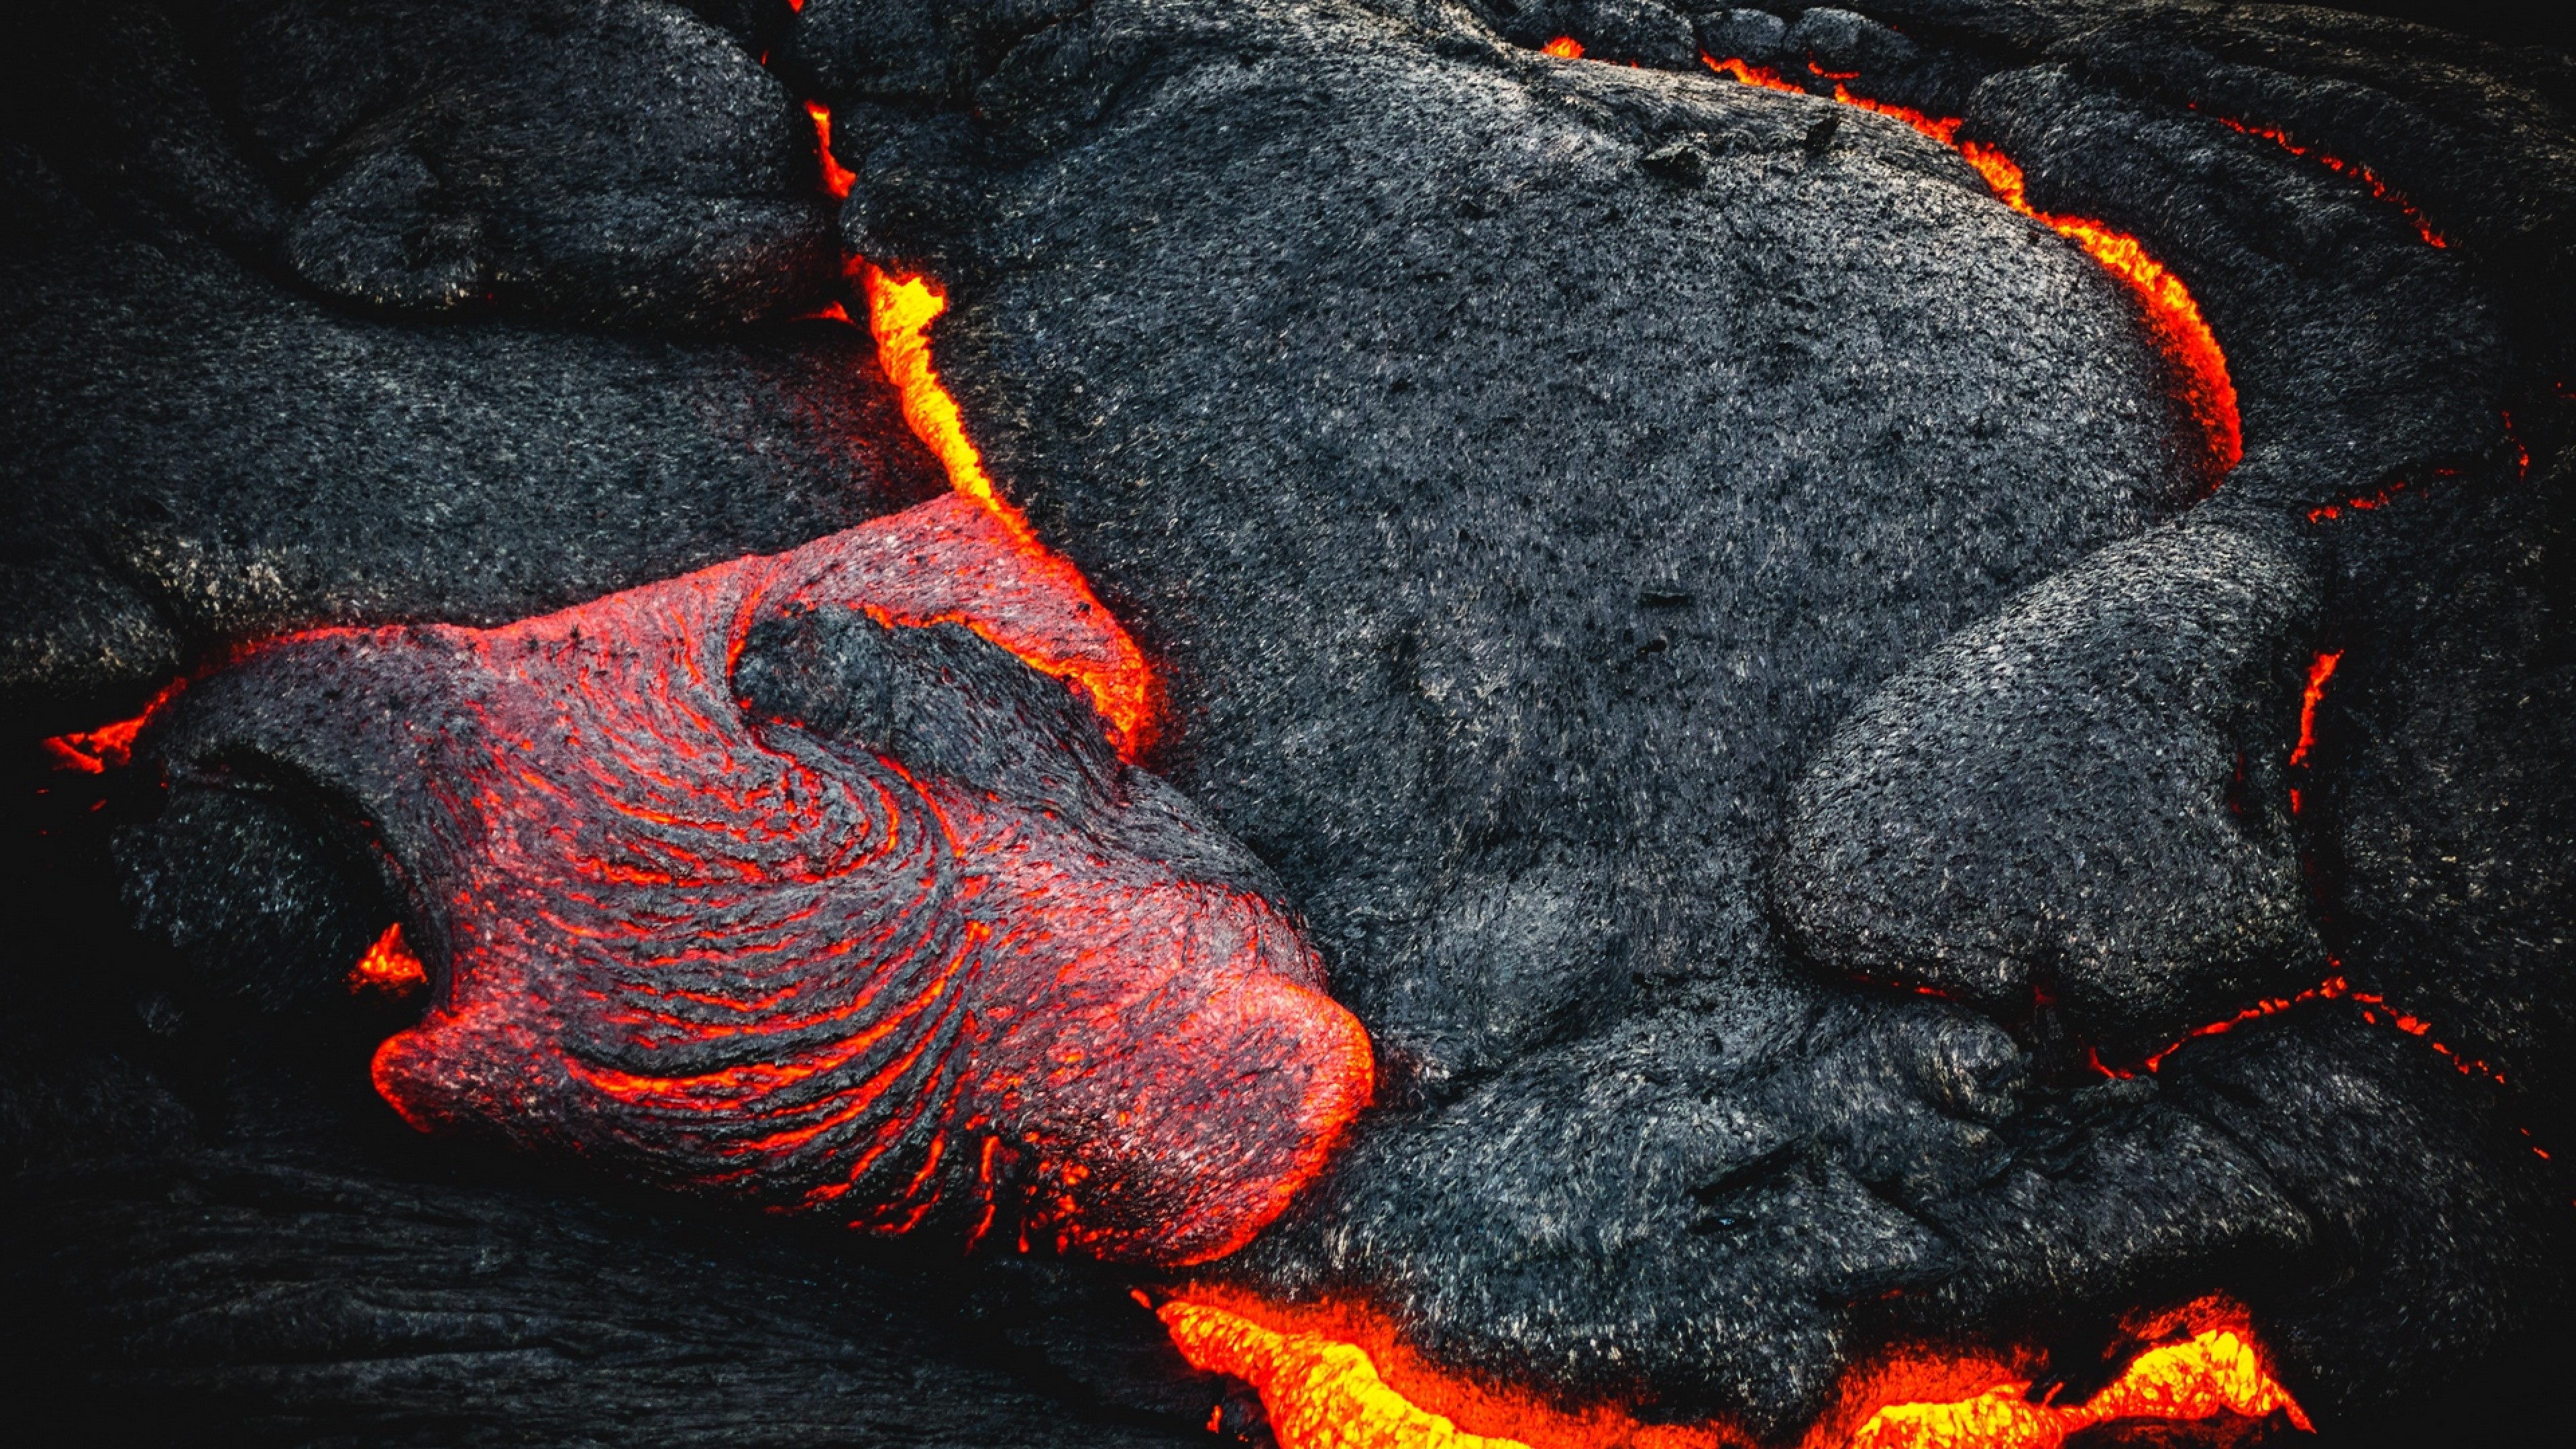 Lava coming out of volcano HD Wallpaper 4K Ultra HD  HD Wallpaper   Wallpapersnet